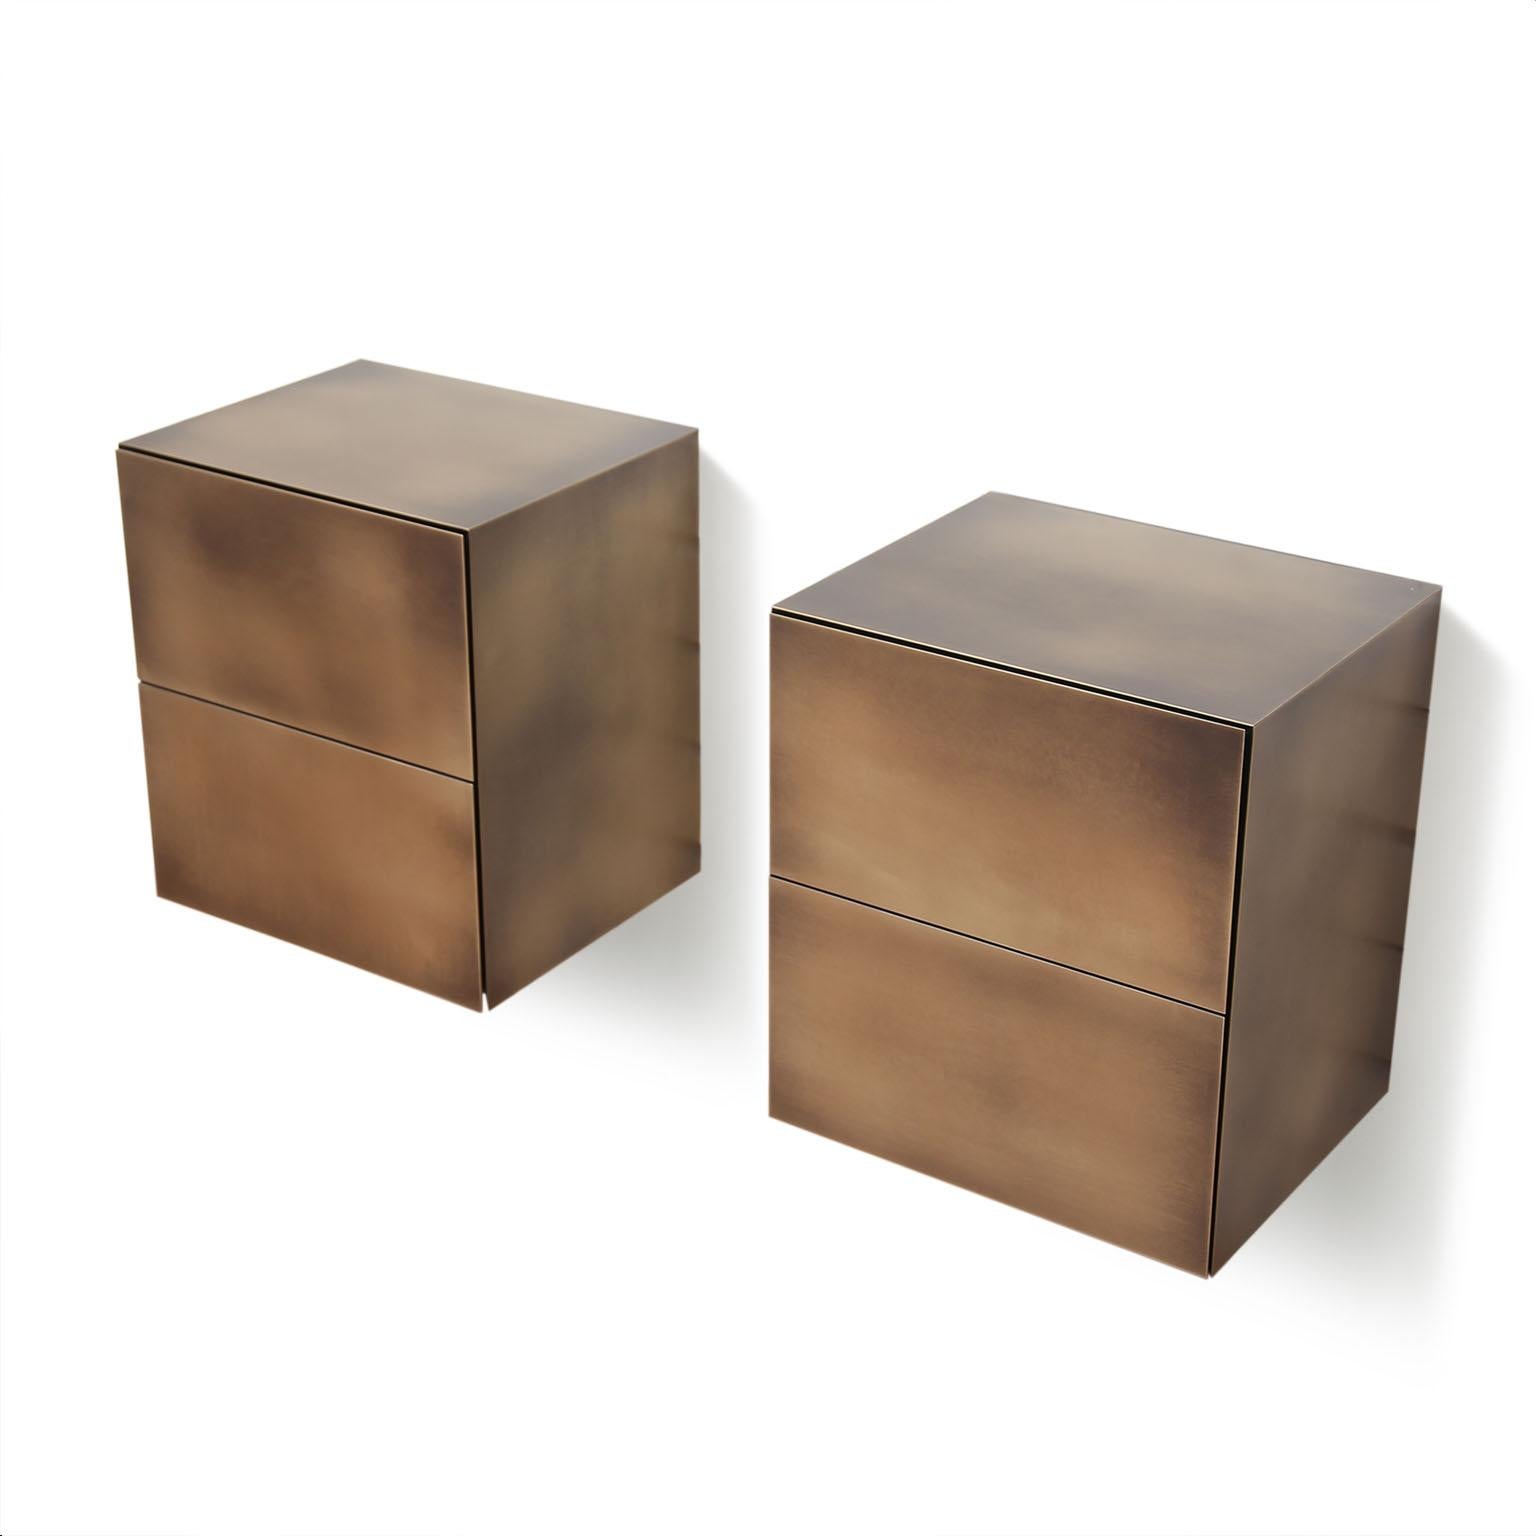 Exquisite Set of 2 nightstands, a masterpiece crafted from engineered wood and adorned with a polished, slightly brushed, burnished, varnished brass finish. These exceptional pieces are designed with meticulous attention to detail, featuring each